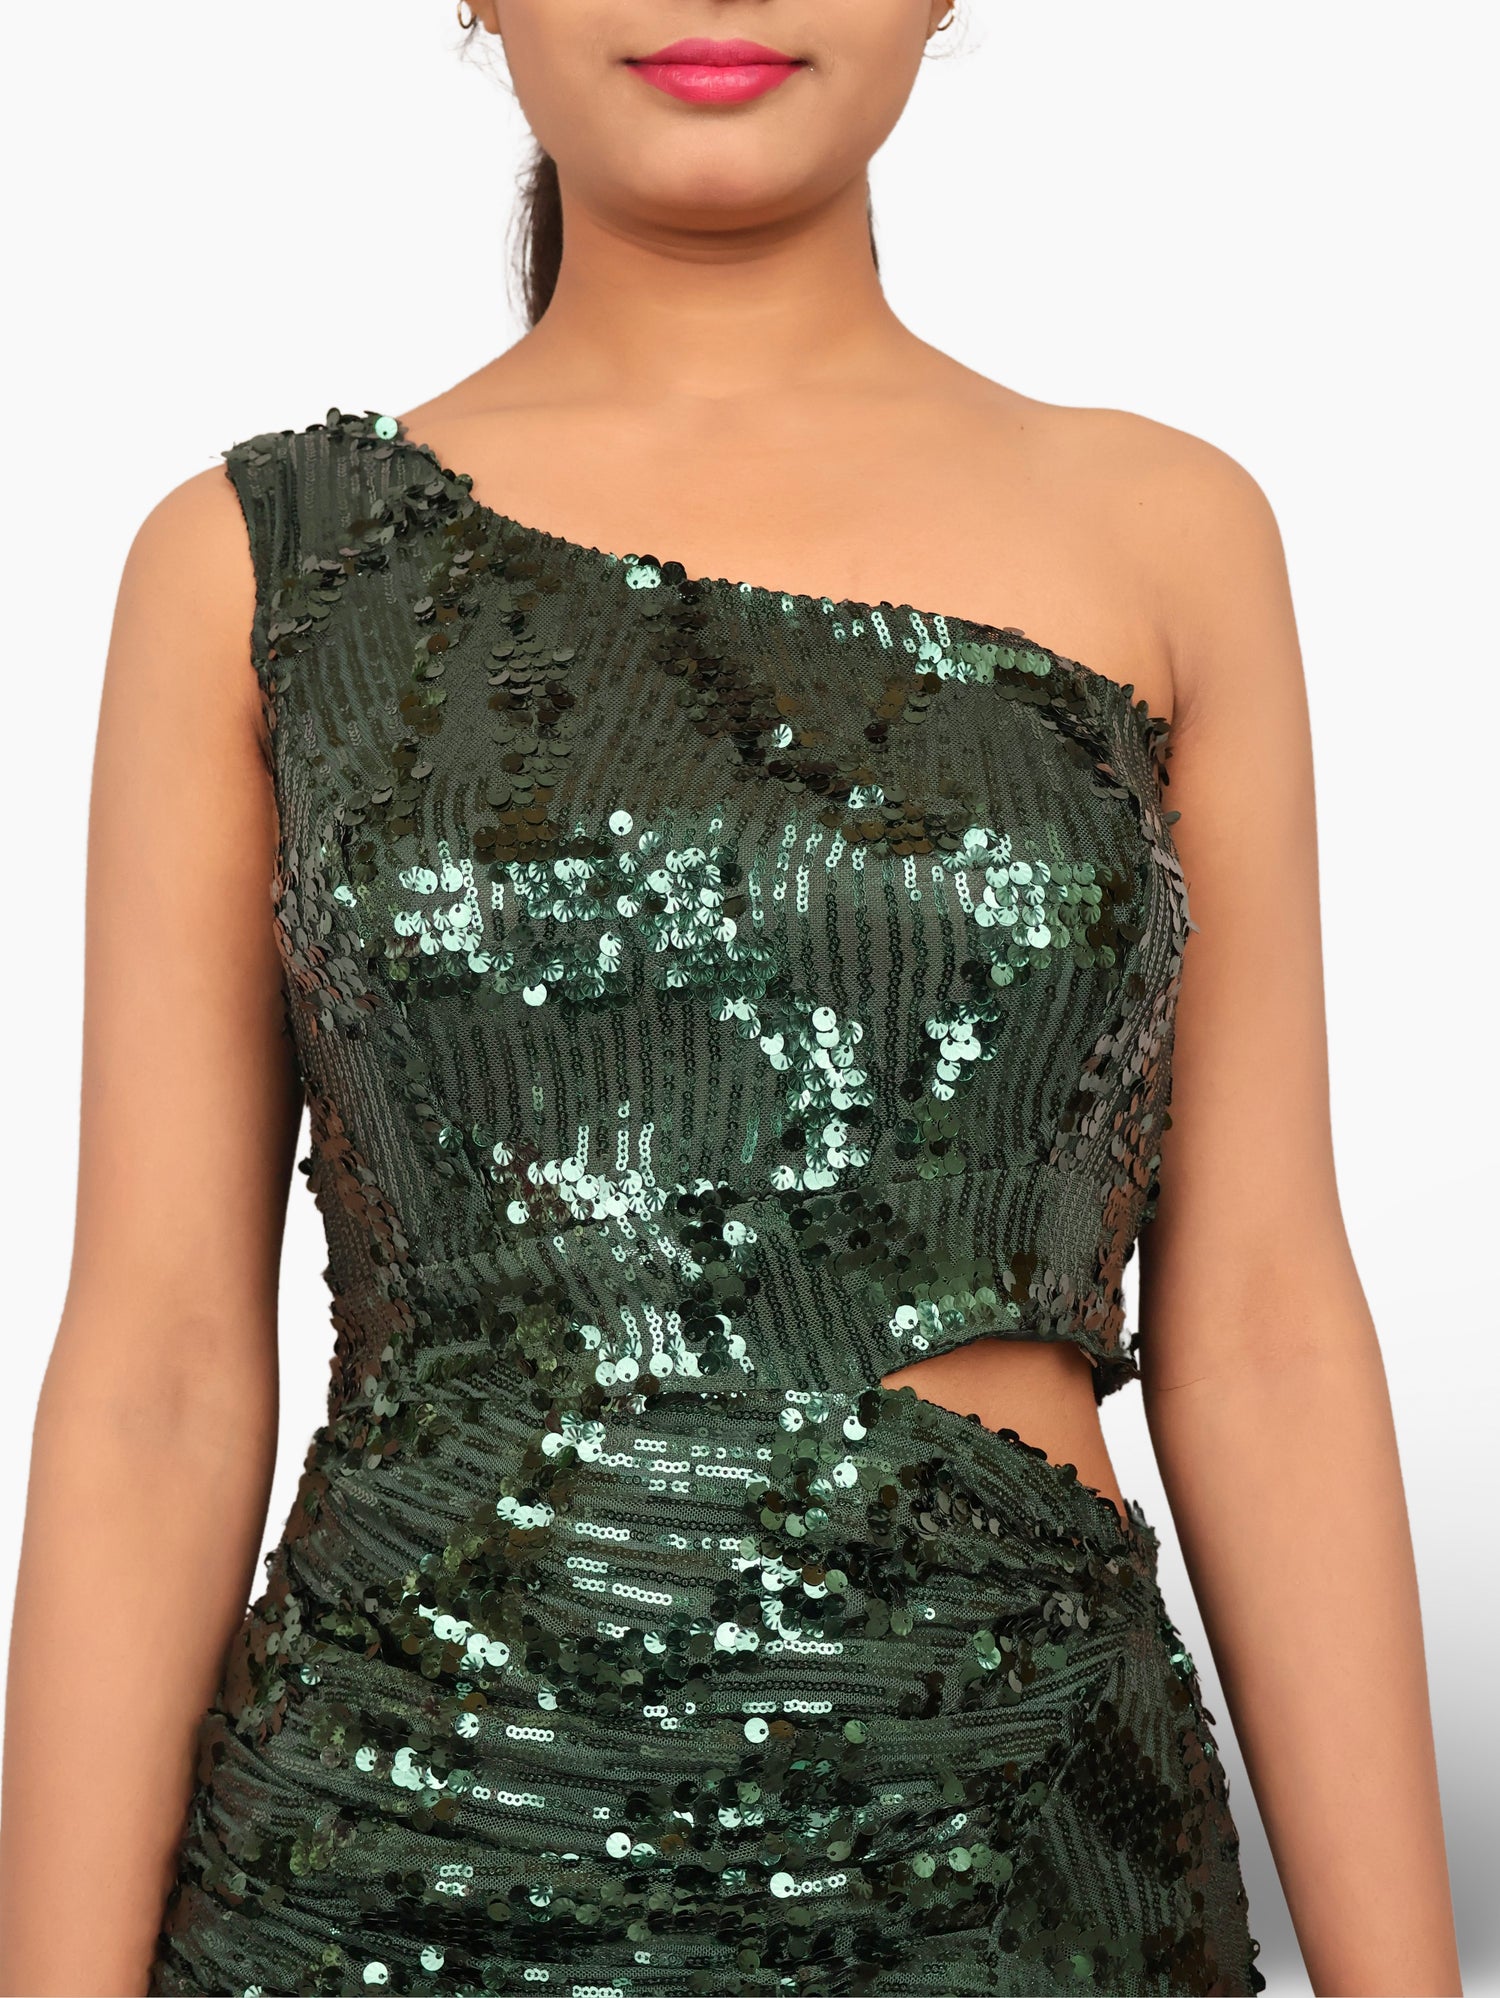 Sequins One-Shoulder Maxi Party Dress by Shreekama Dark Green Dress for Party Festival Wedding Occasion in Noida